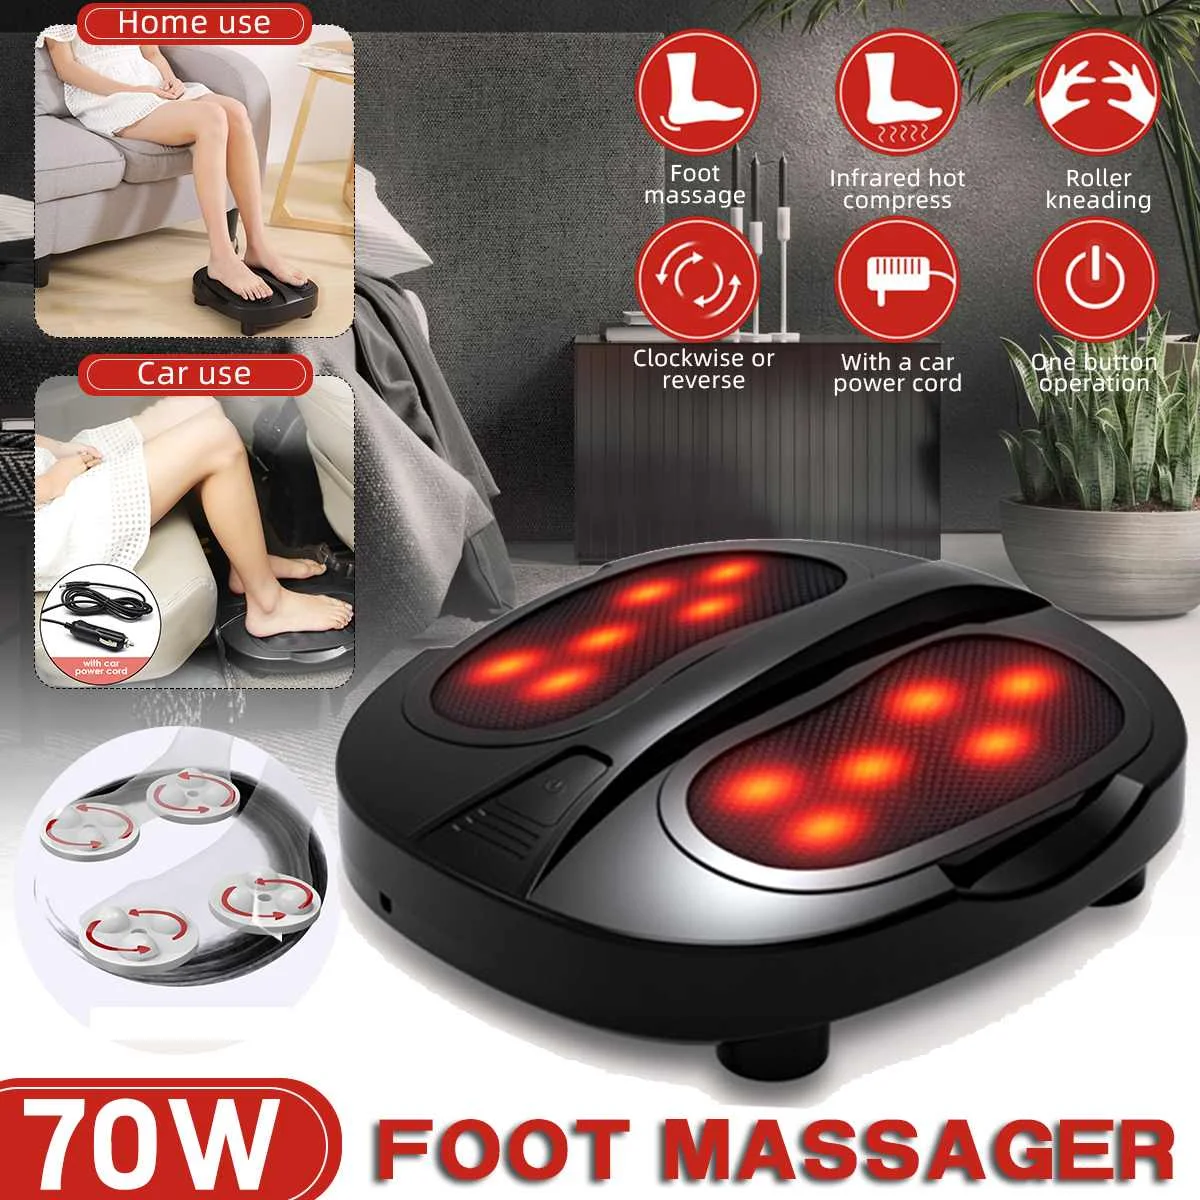 

100-240V Car Electric Heating Foot Massager Heat Therapy Relaxation Kneading Roller Shiatsu Foot Massage Machine for Relief Leg